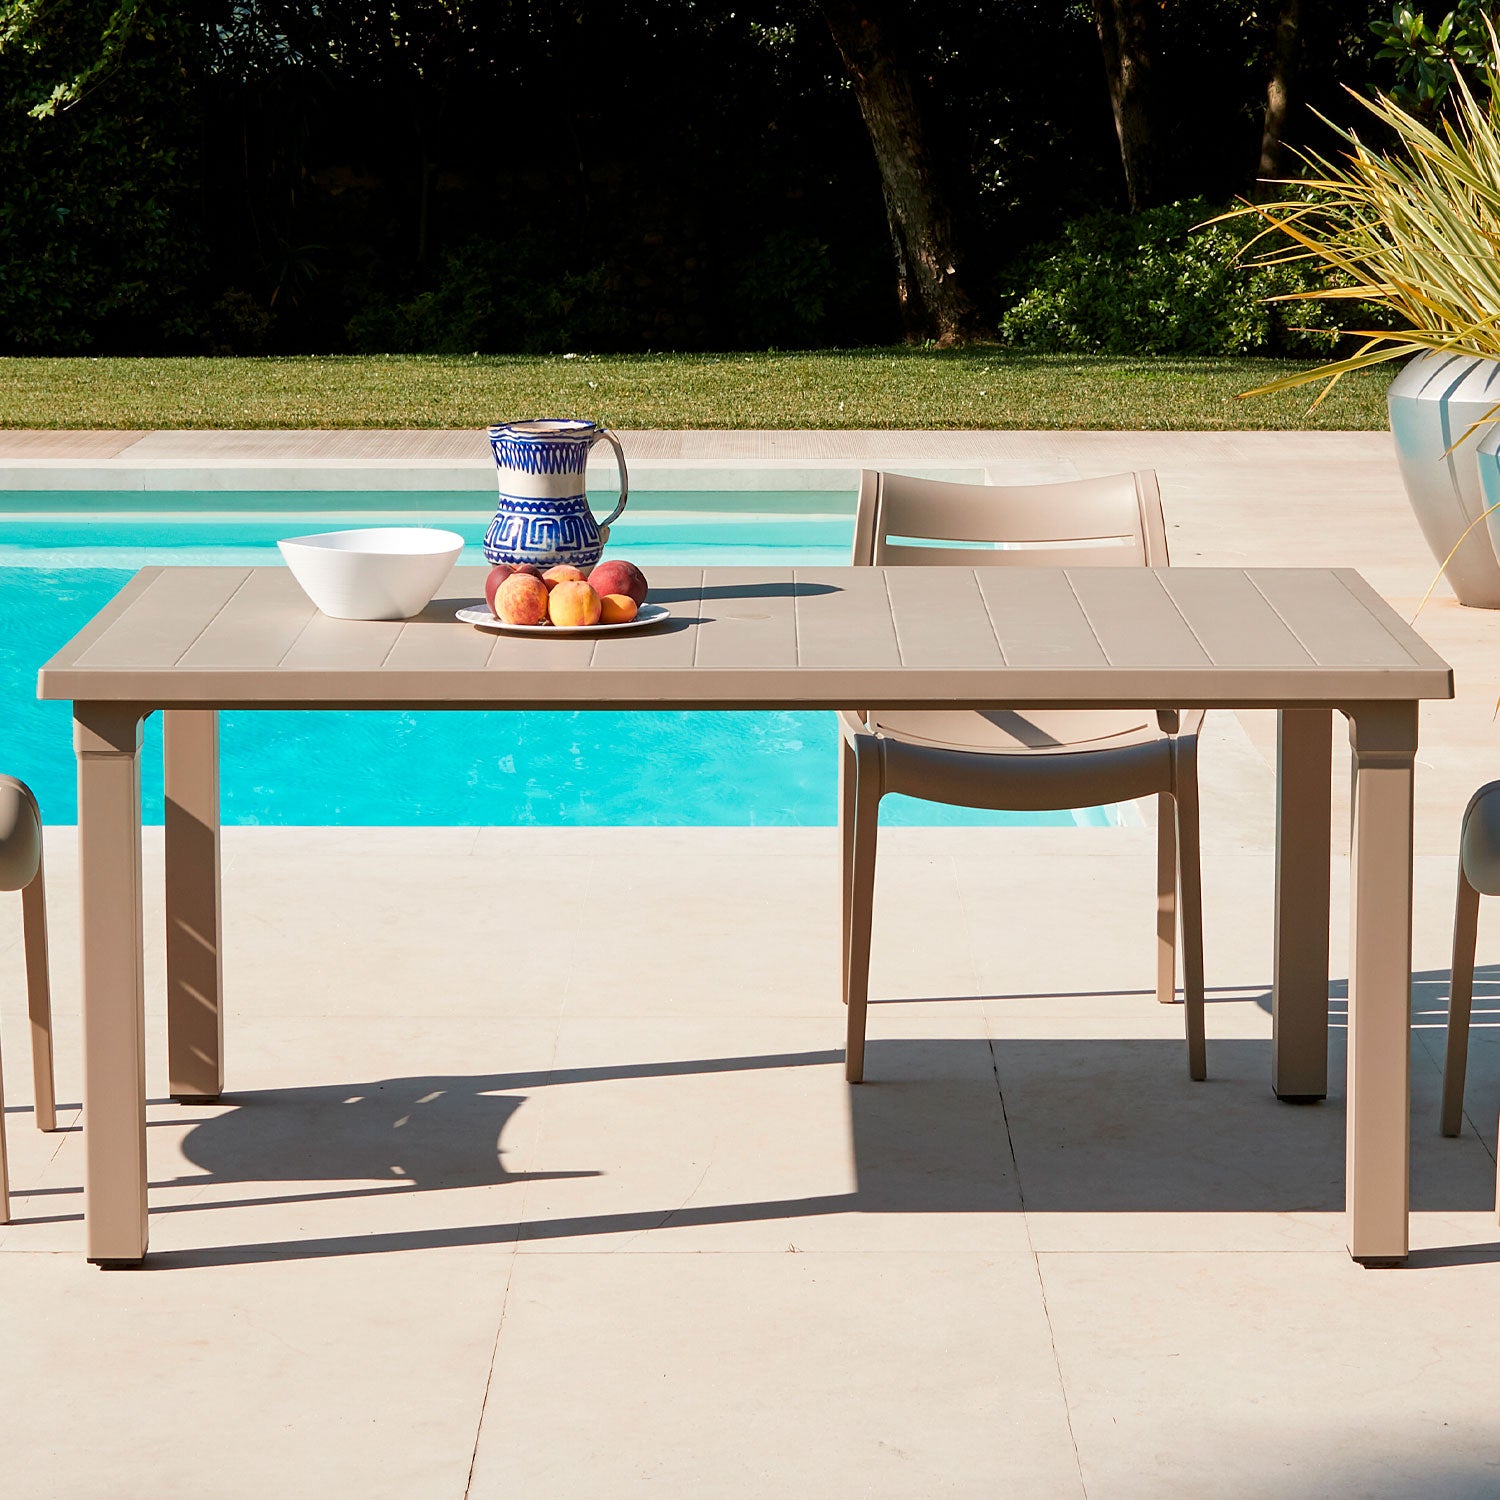 Ercole 170cm x 100cm Technopolymer Rectangular Dining Table by Scab Design